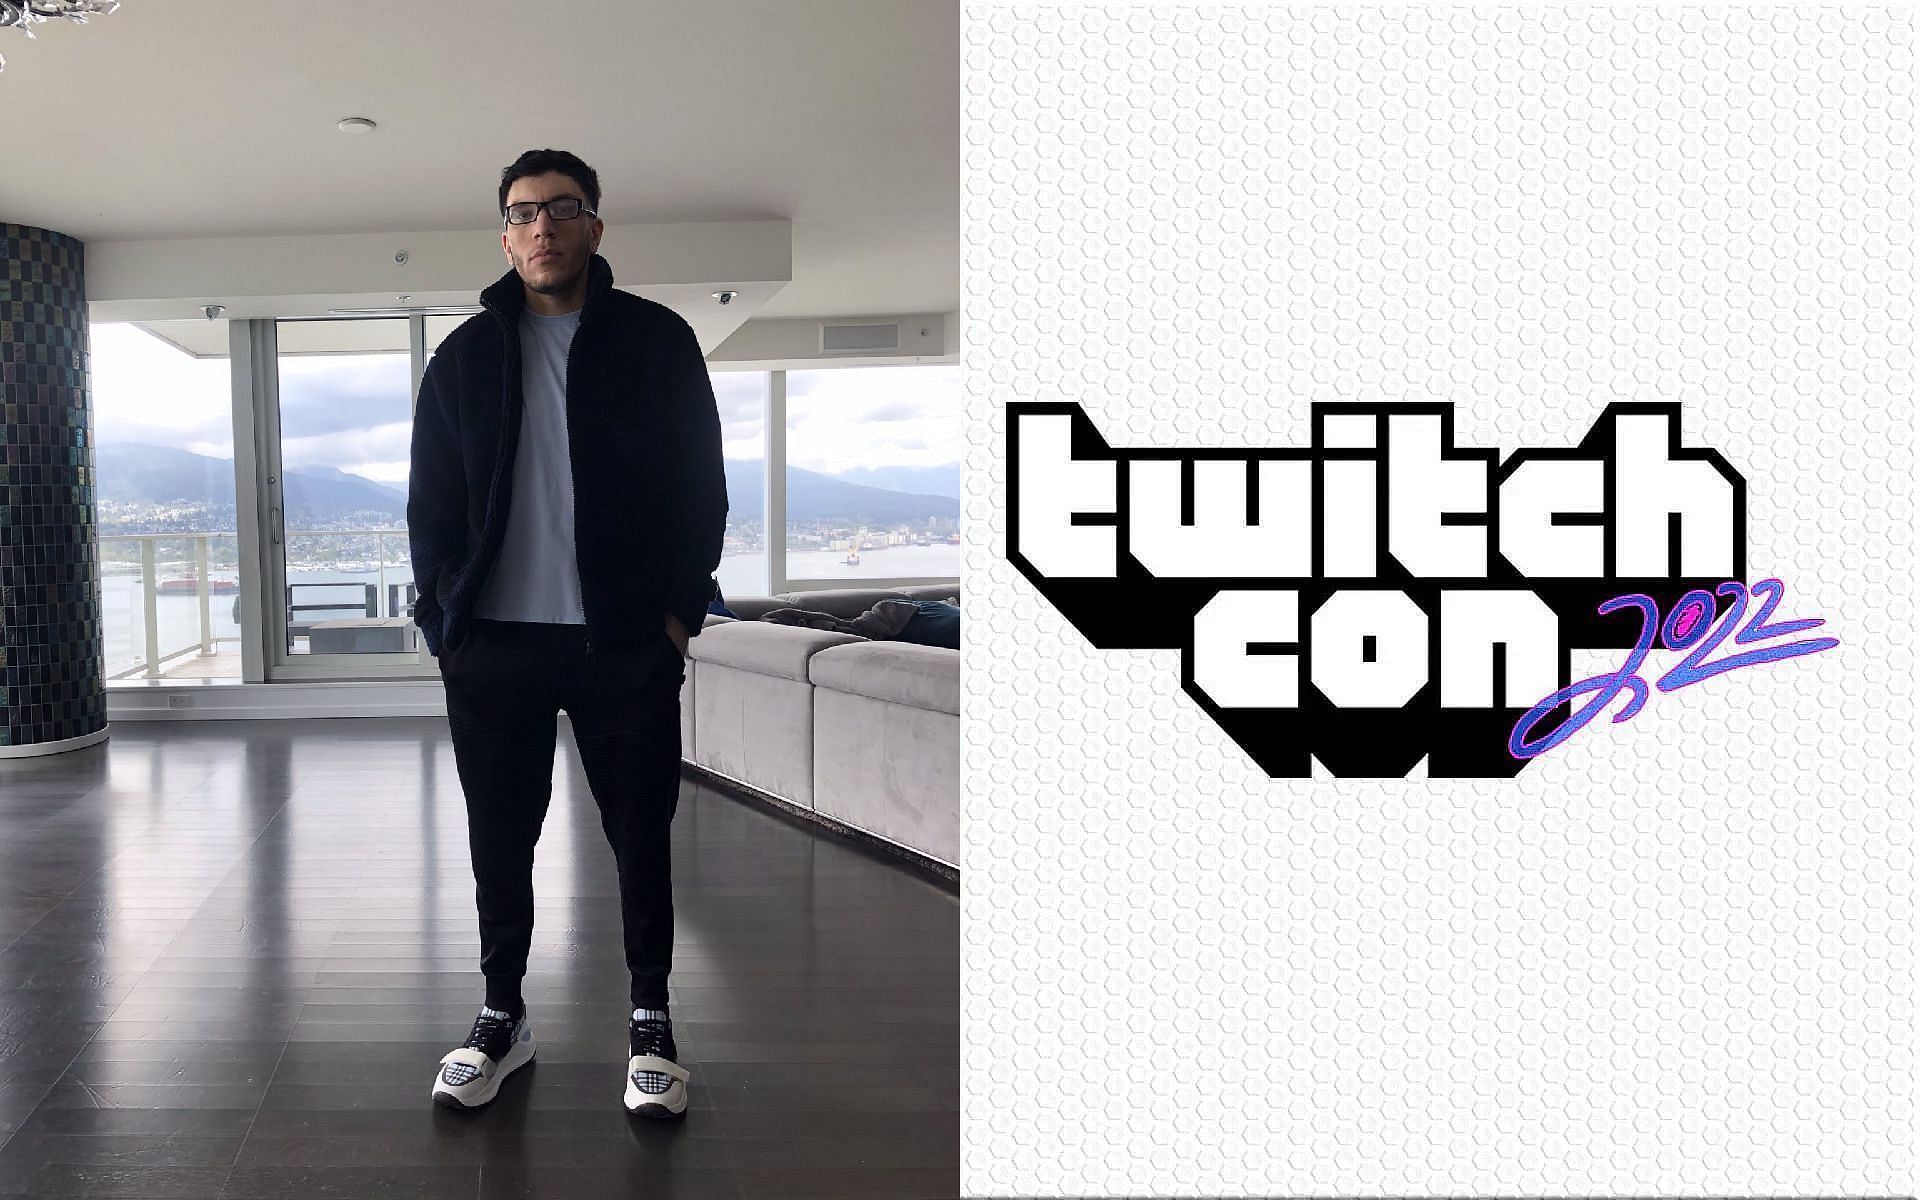 Trainwreckstv shares some strong opinions on TwitchCon 2022 attendees (Image via Sportskeeda)